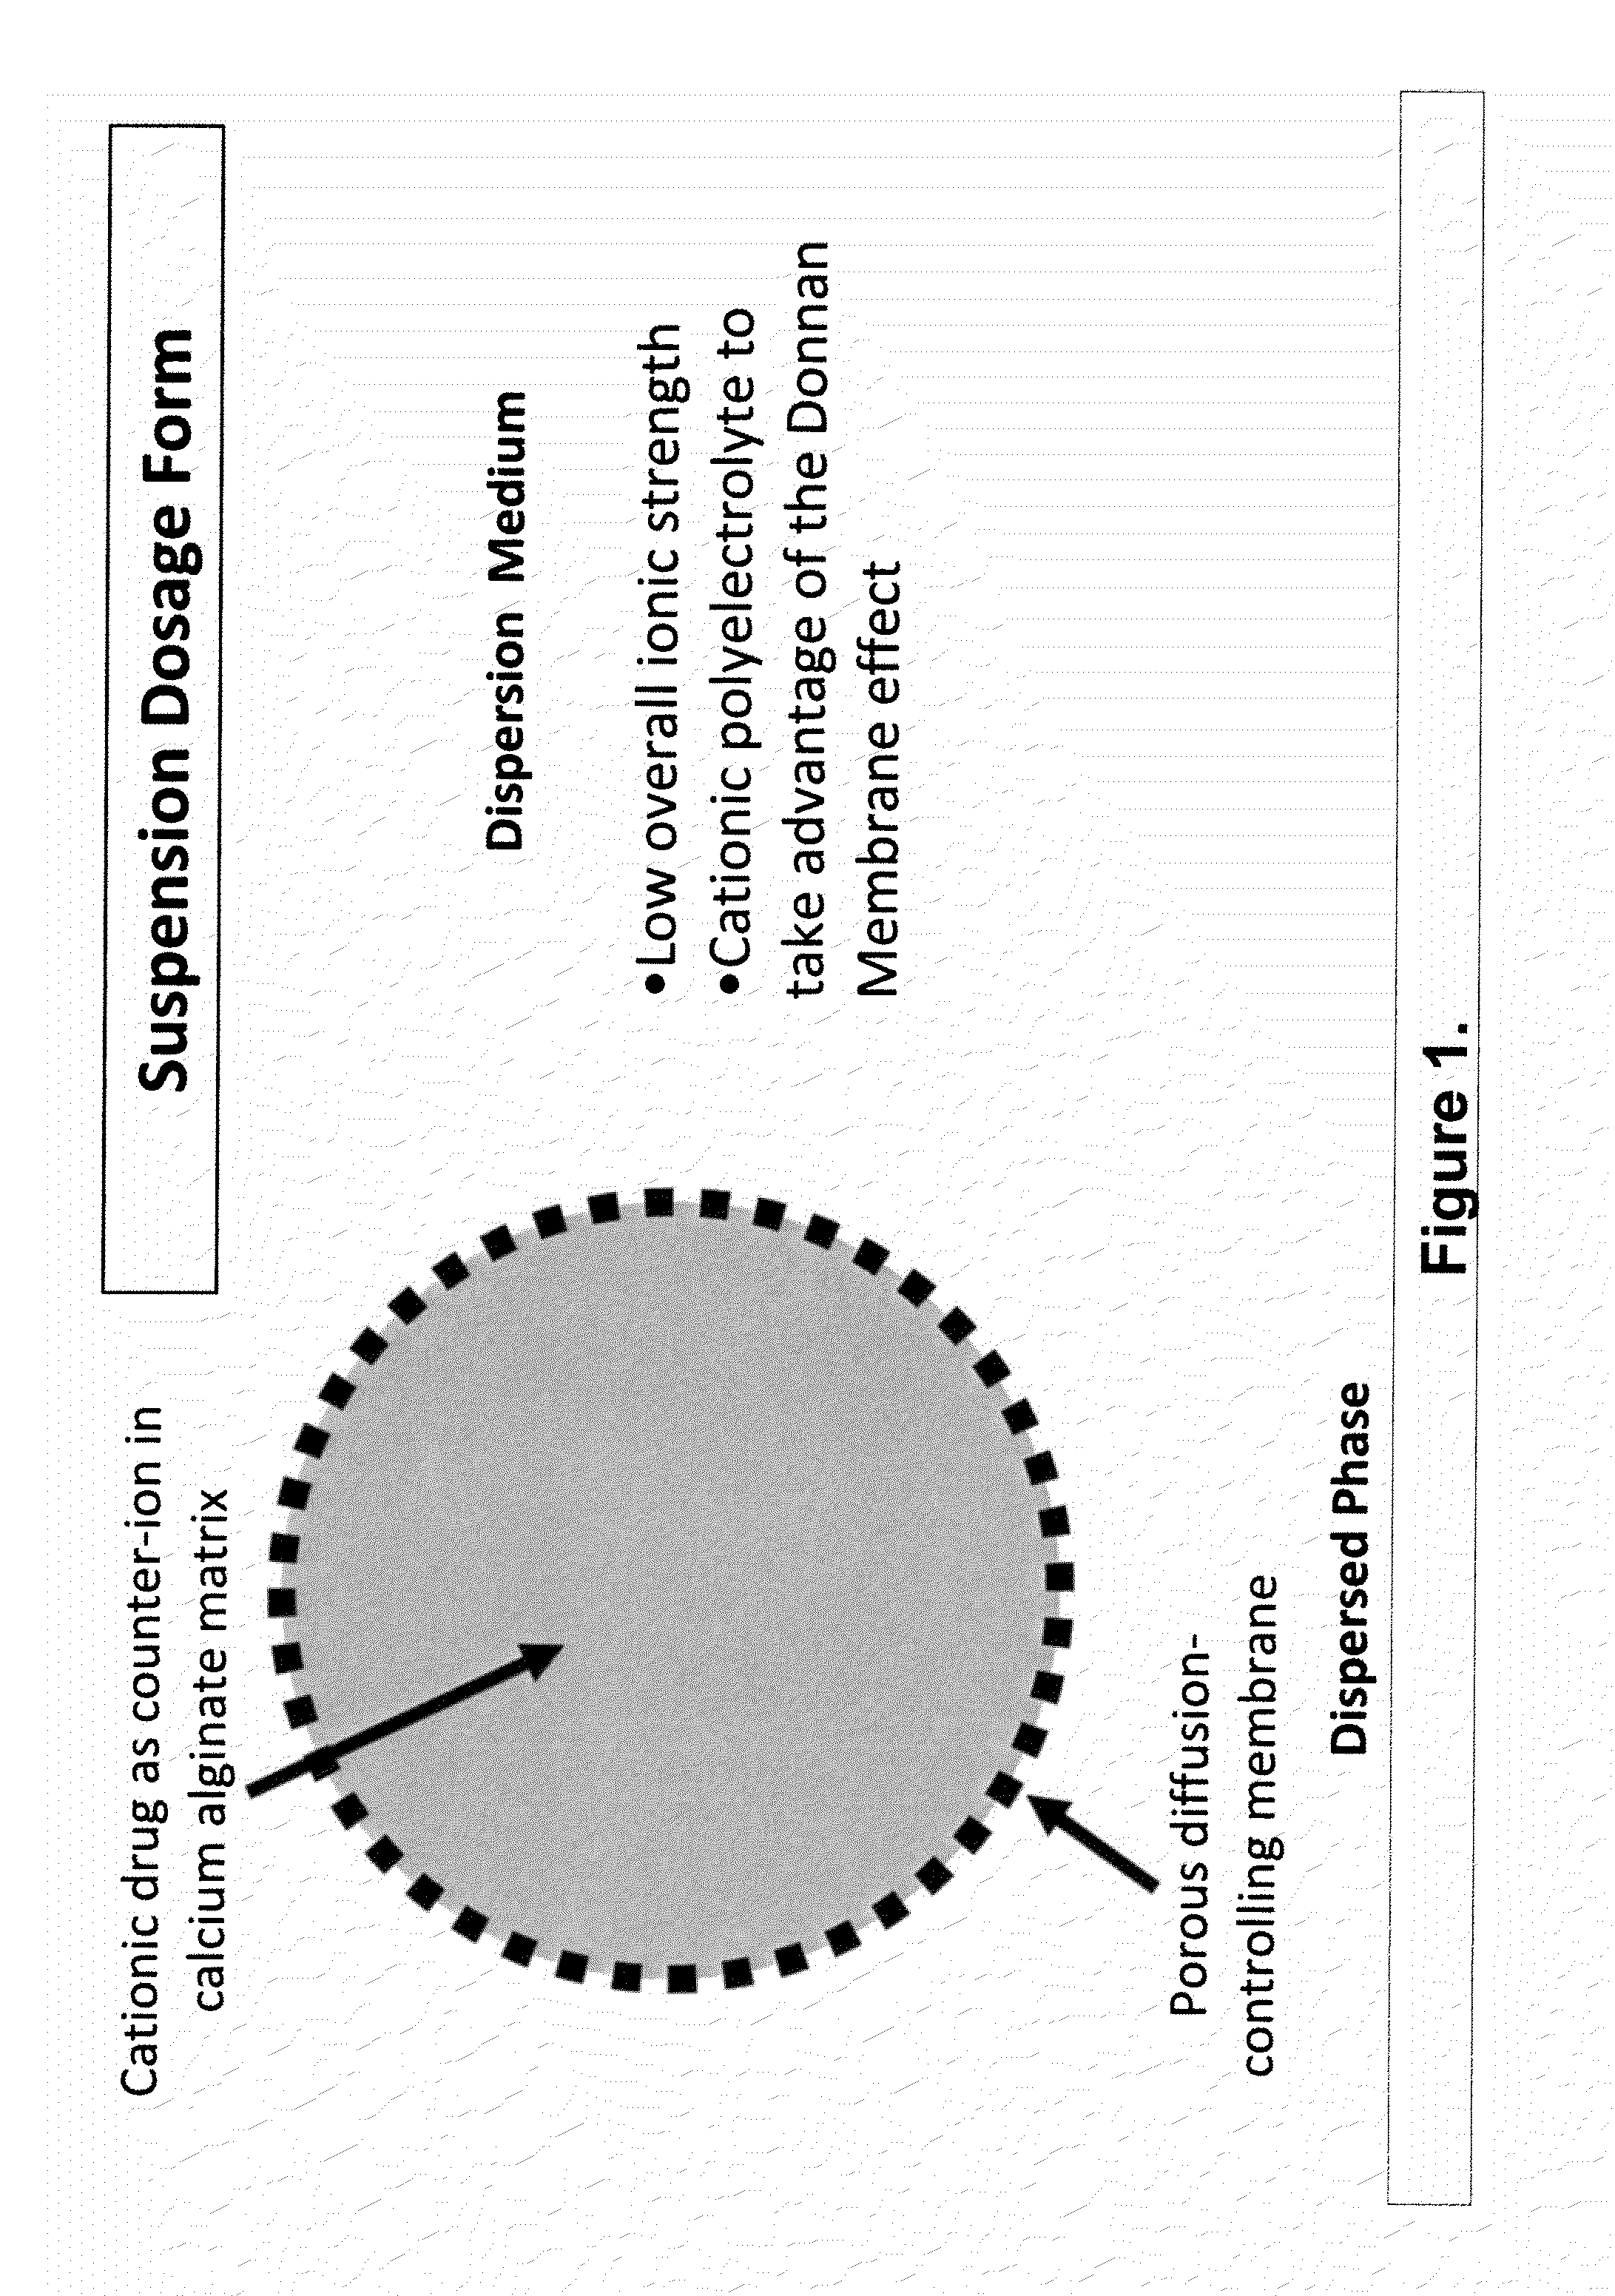 Sustained-release drug delivery compositions and methods